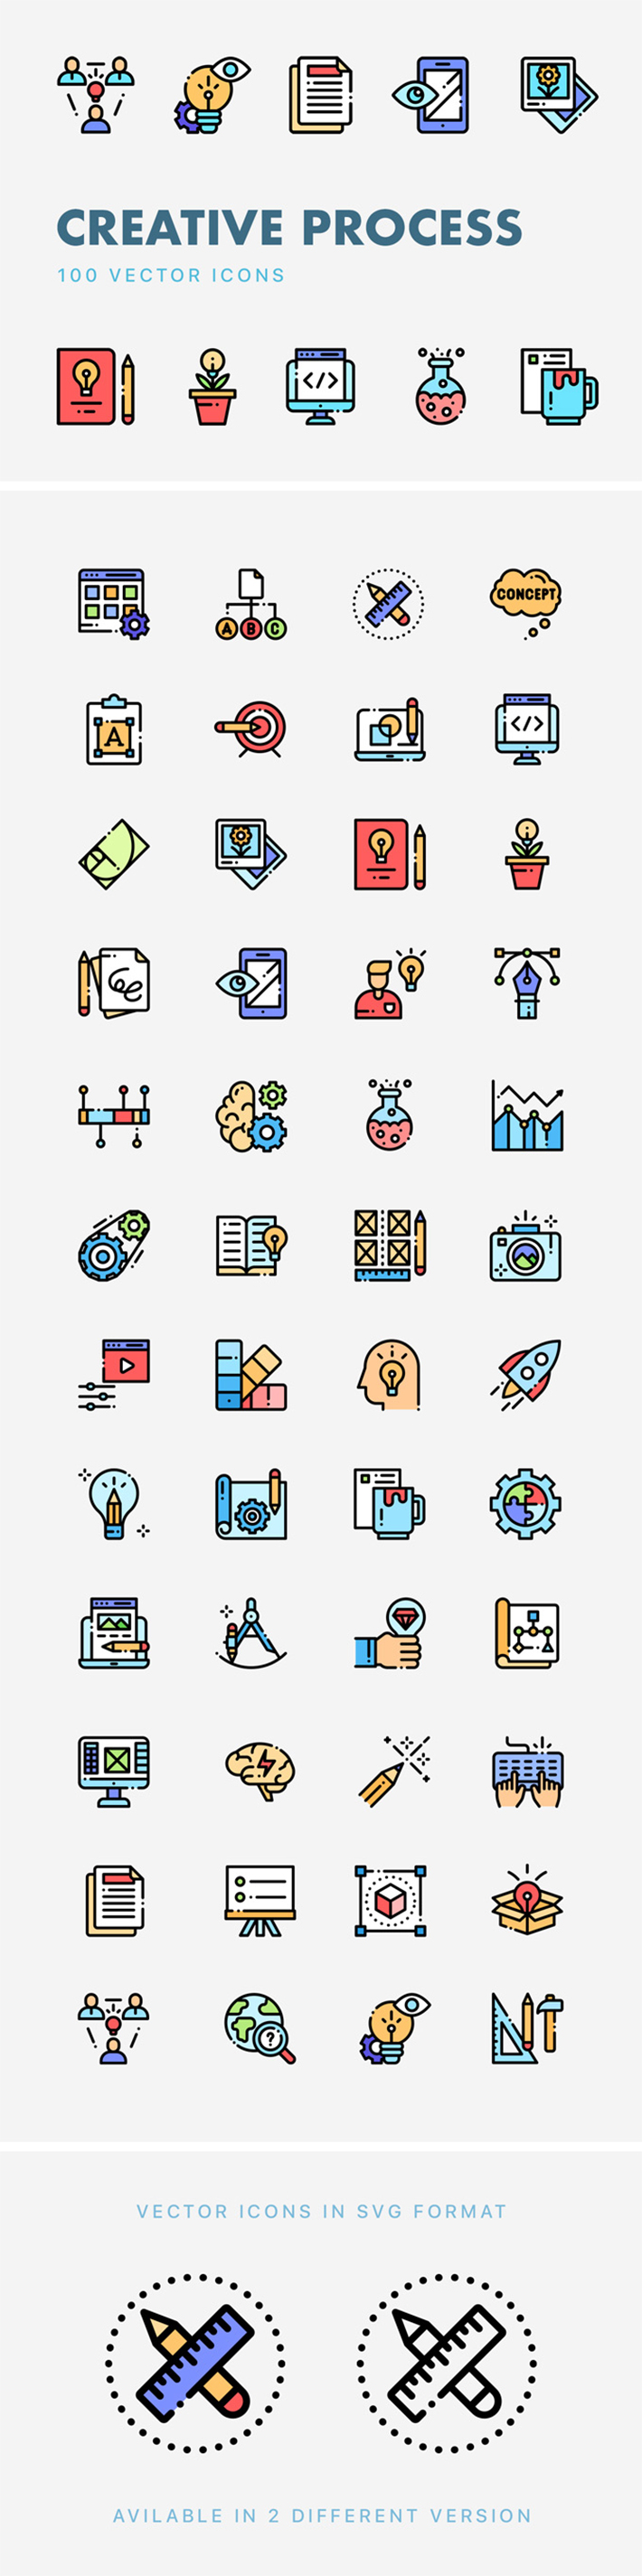 Free Download 100 Elegant Process Icons For Designers (Vector)